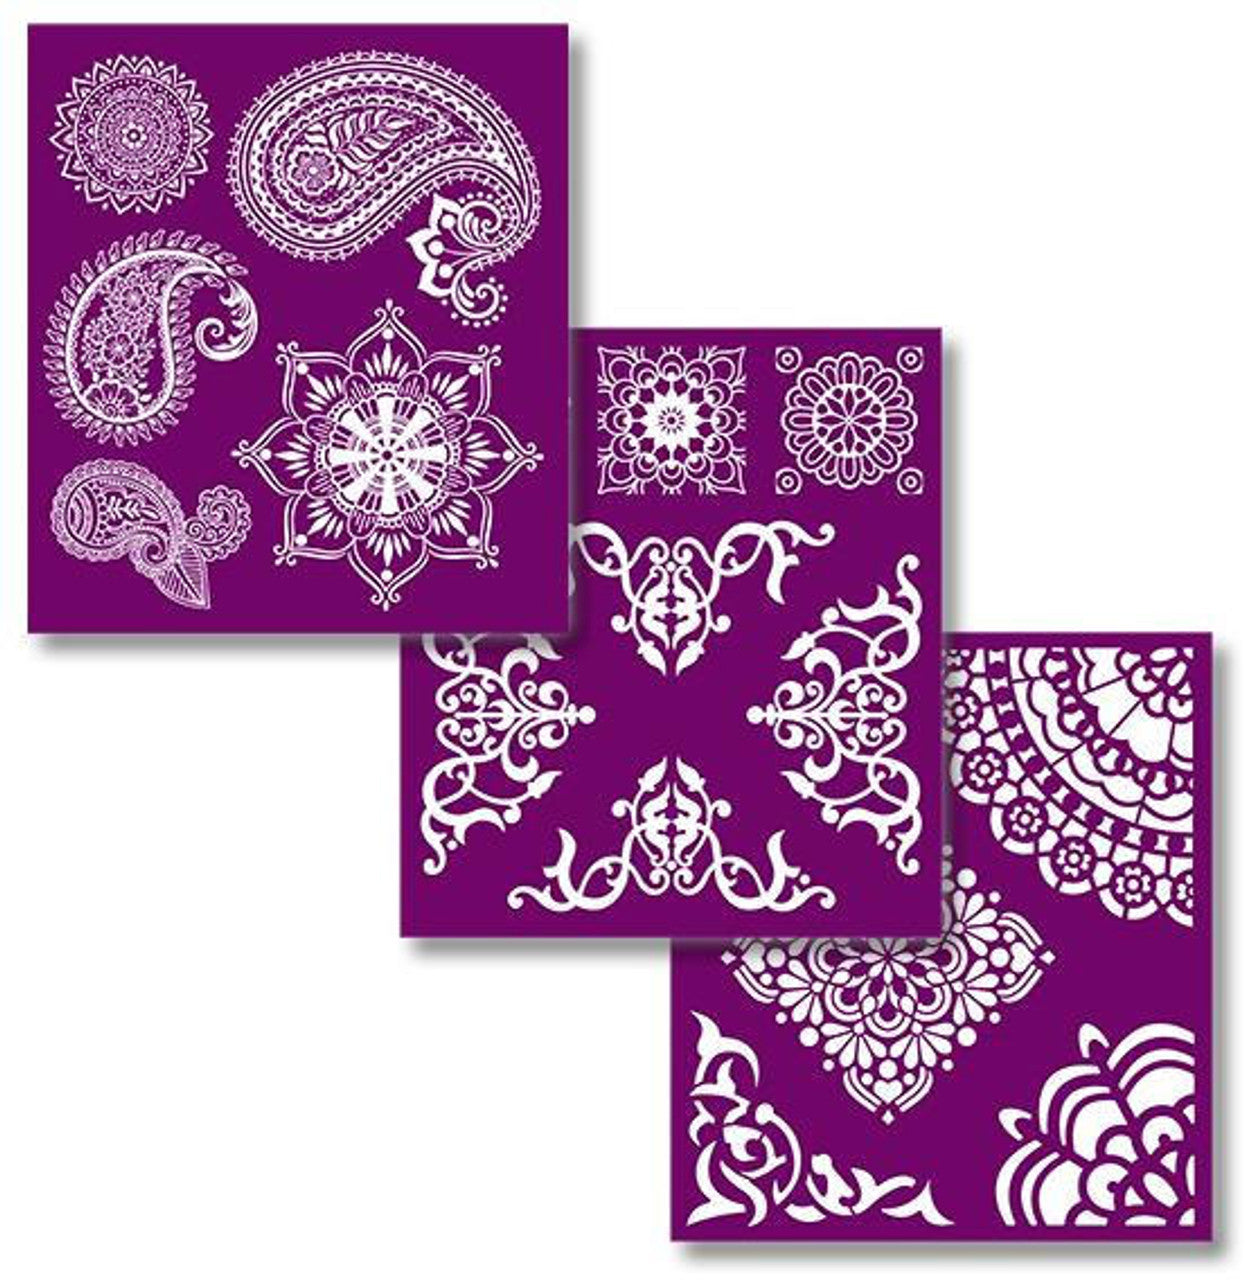 MOSAIC Silk Screen Stencils 3 designs 8" x 10" by Belles and Whistles